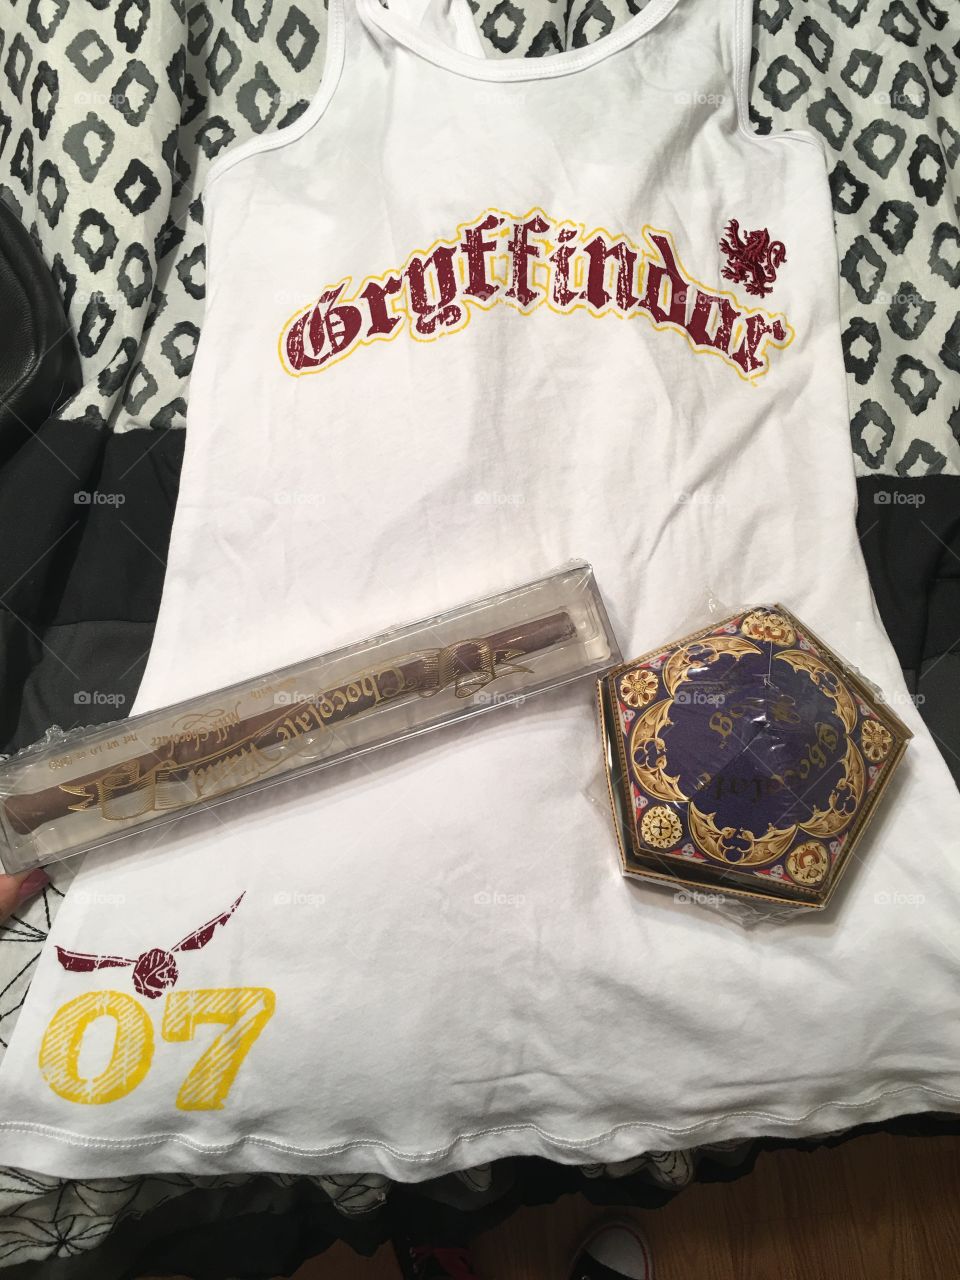 Harry potter wand,chocolate frog and t-shirt